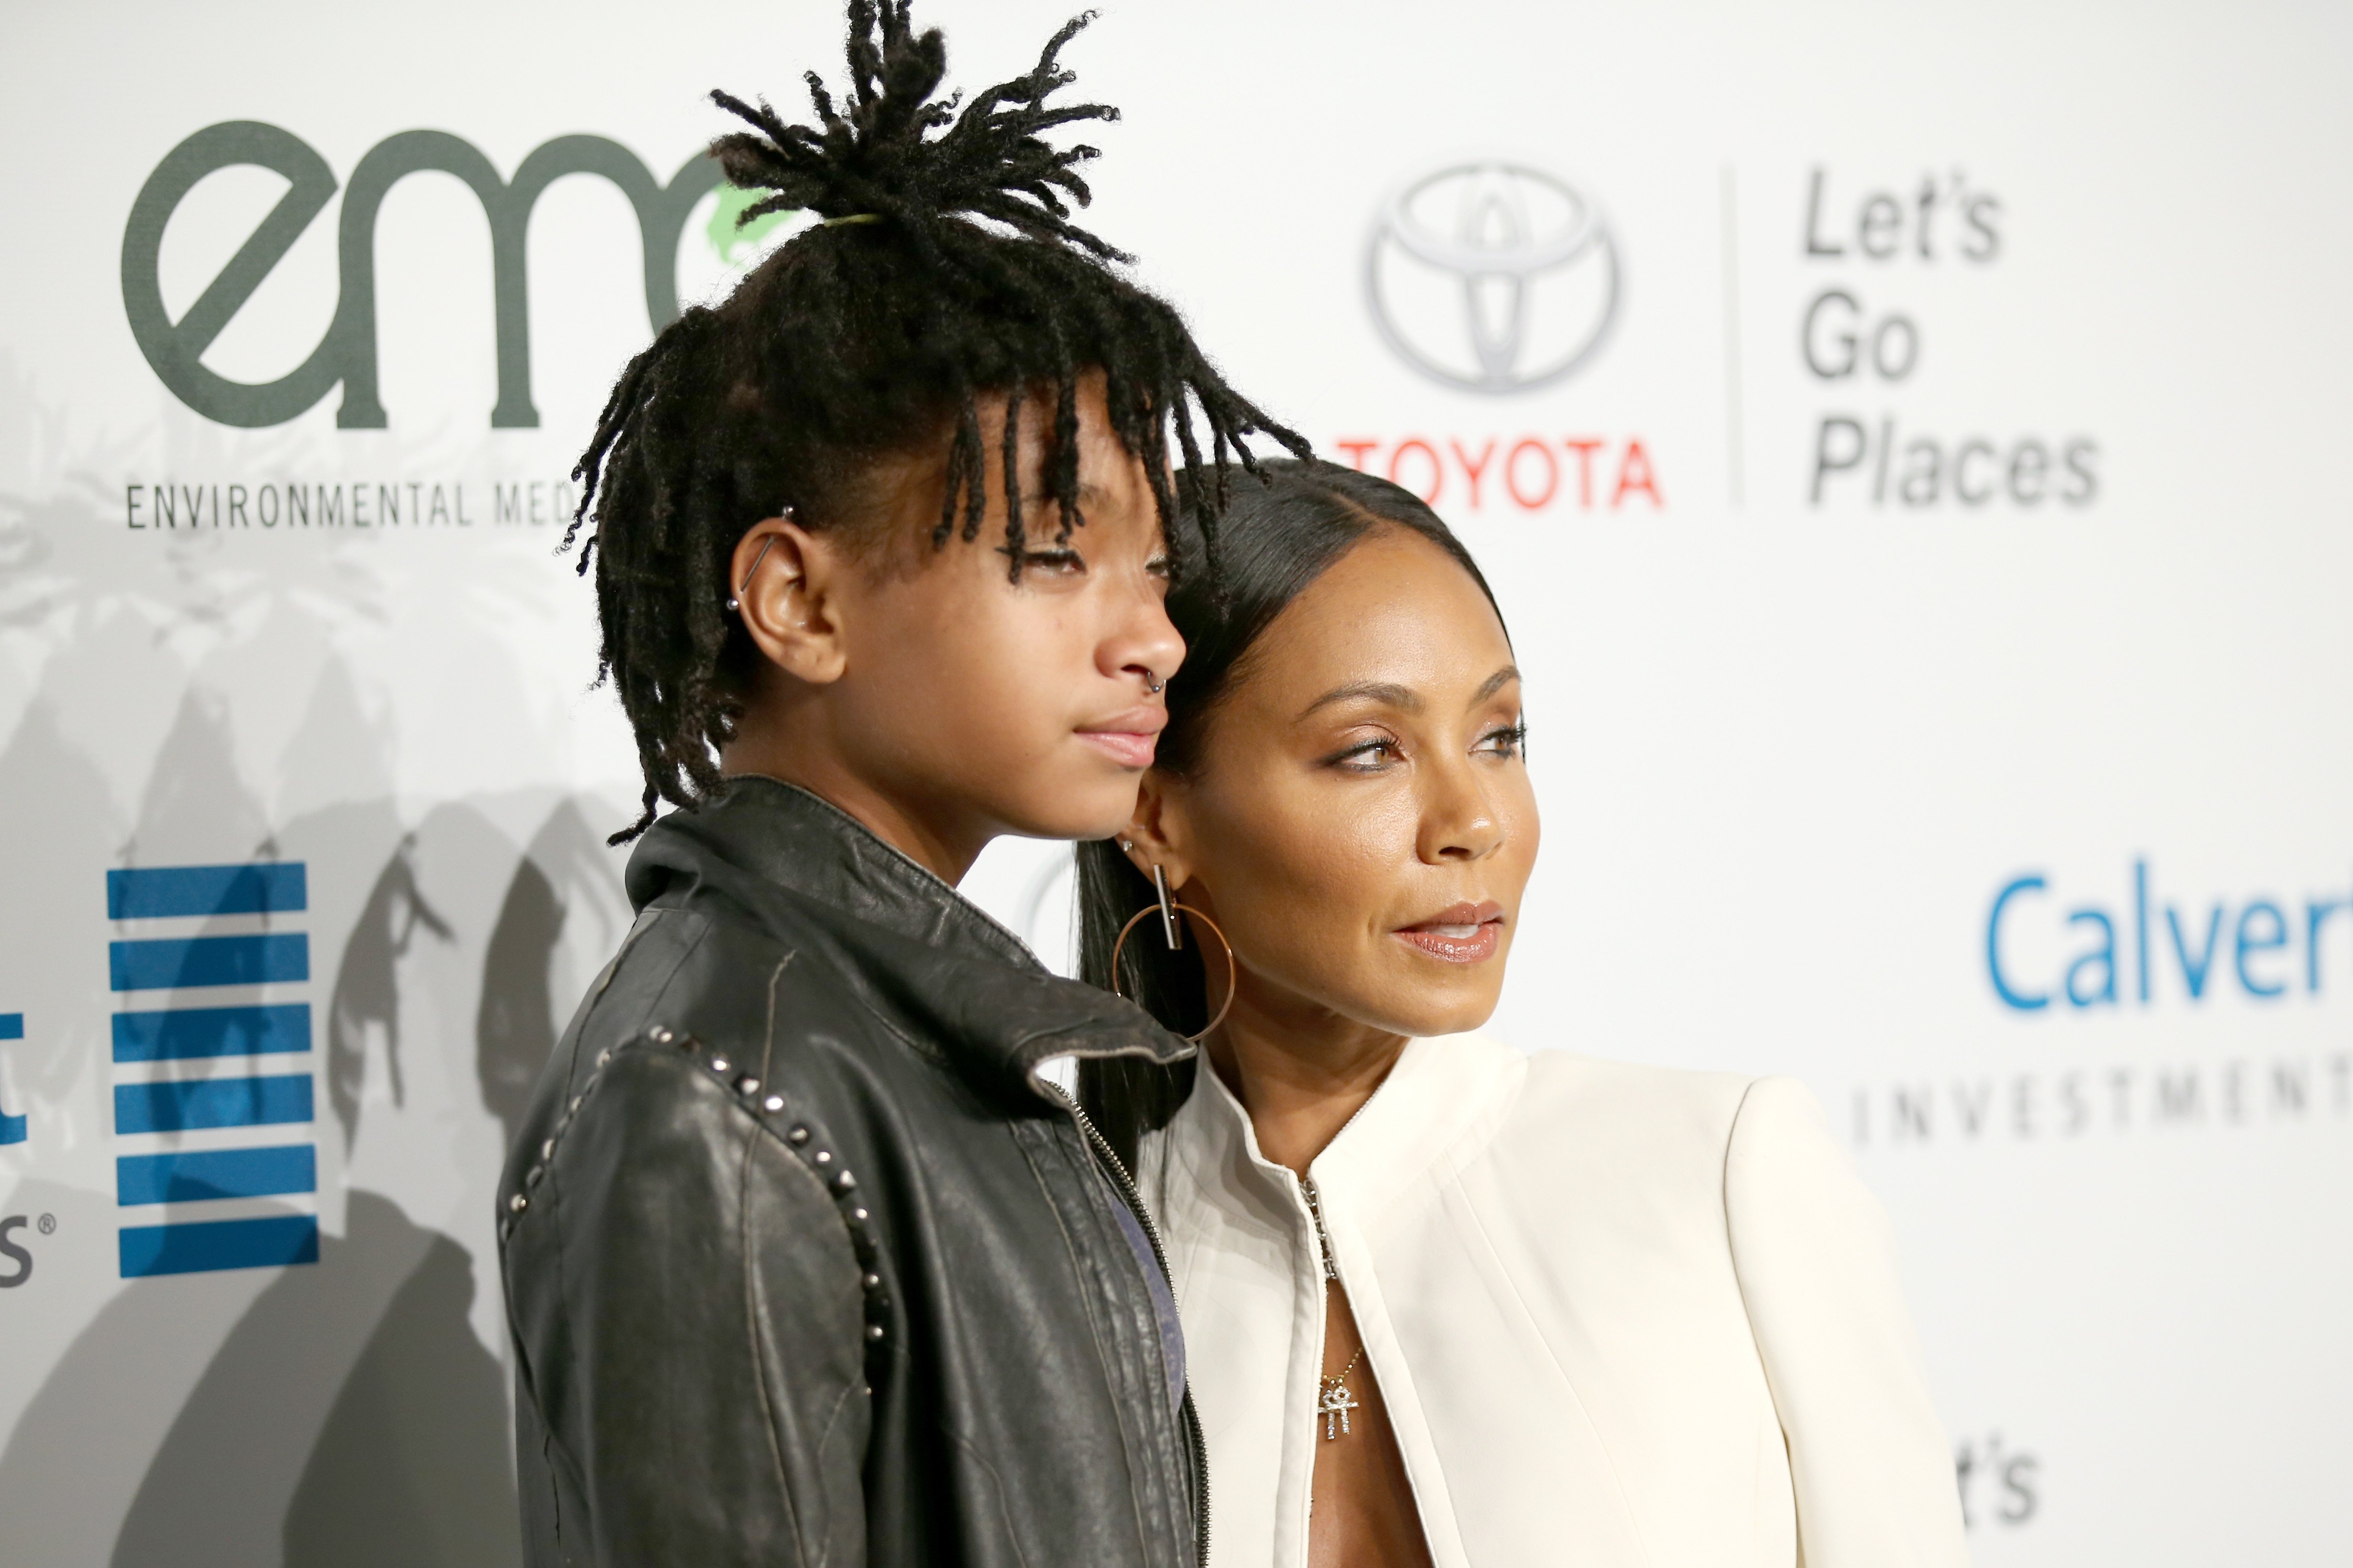 Willow Smith and Jada Pinkett Smith posing and smirking while looking away from the camera.